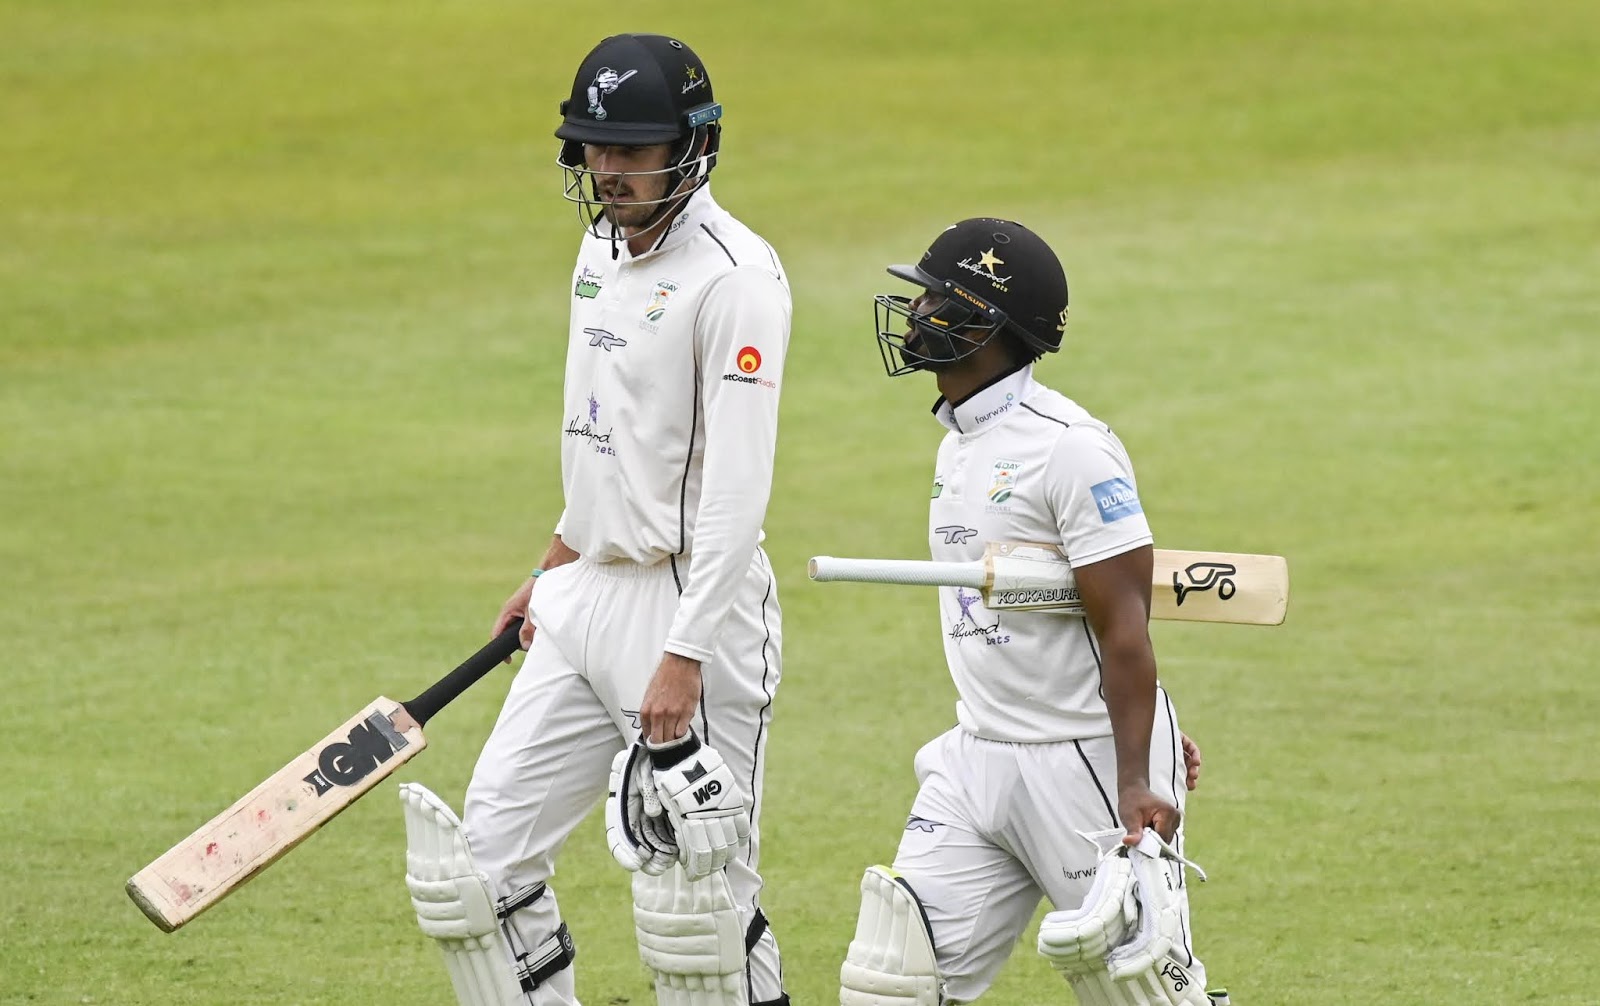 Dolphins hampered by bad light at Kingsmead